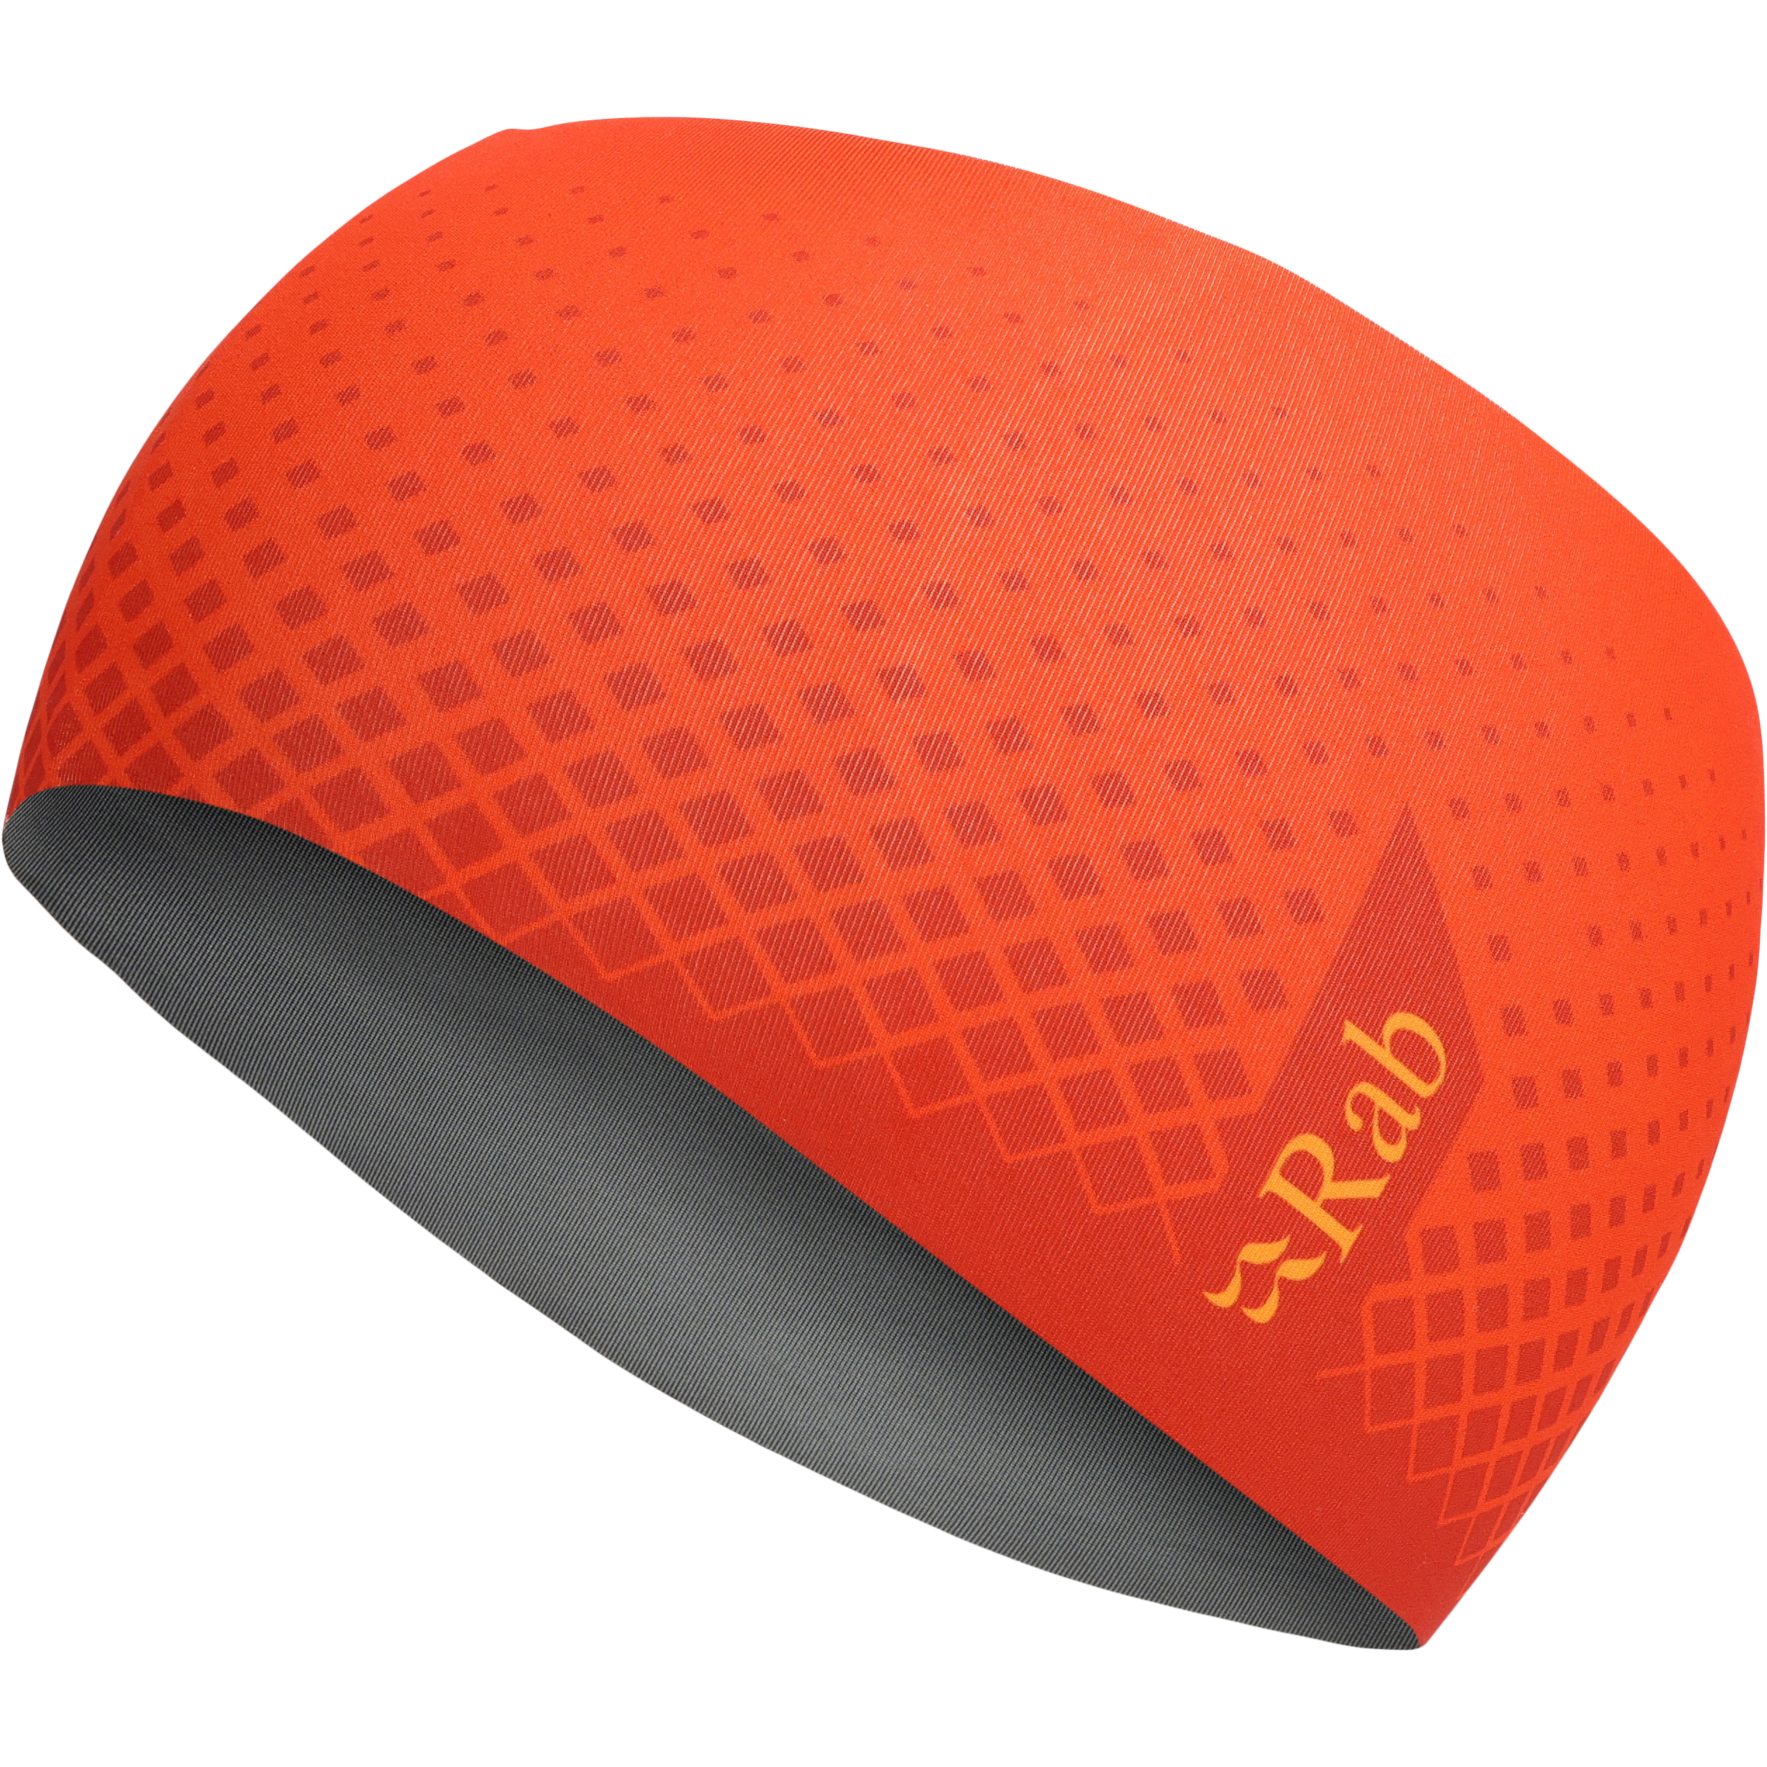 Picture of Rab Transition Windstopper Headband - firecracker